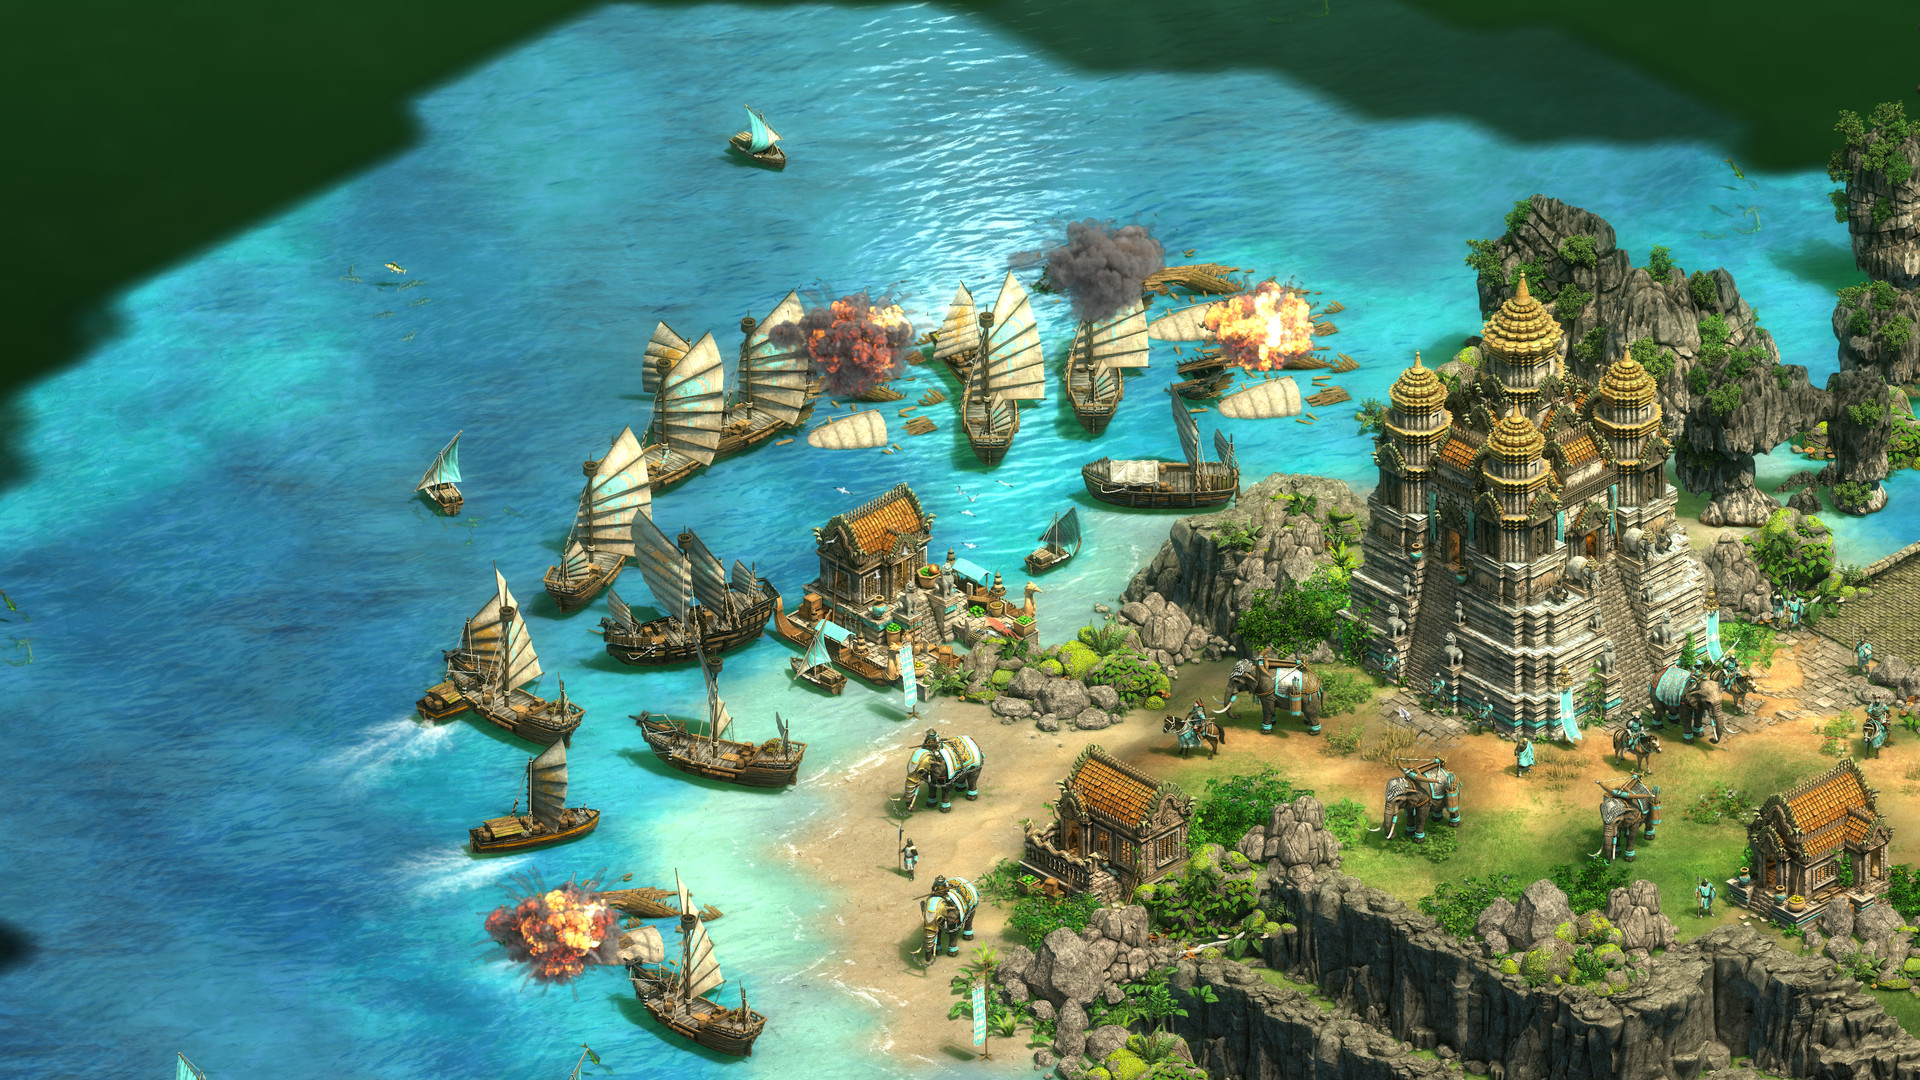 Age of Empires II: Definitive Edition Screenshot 3